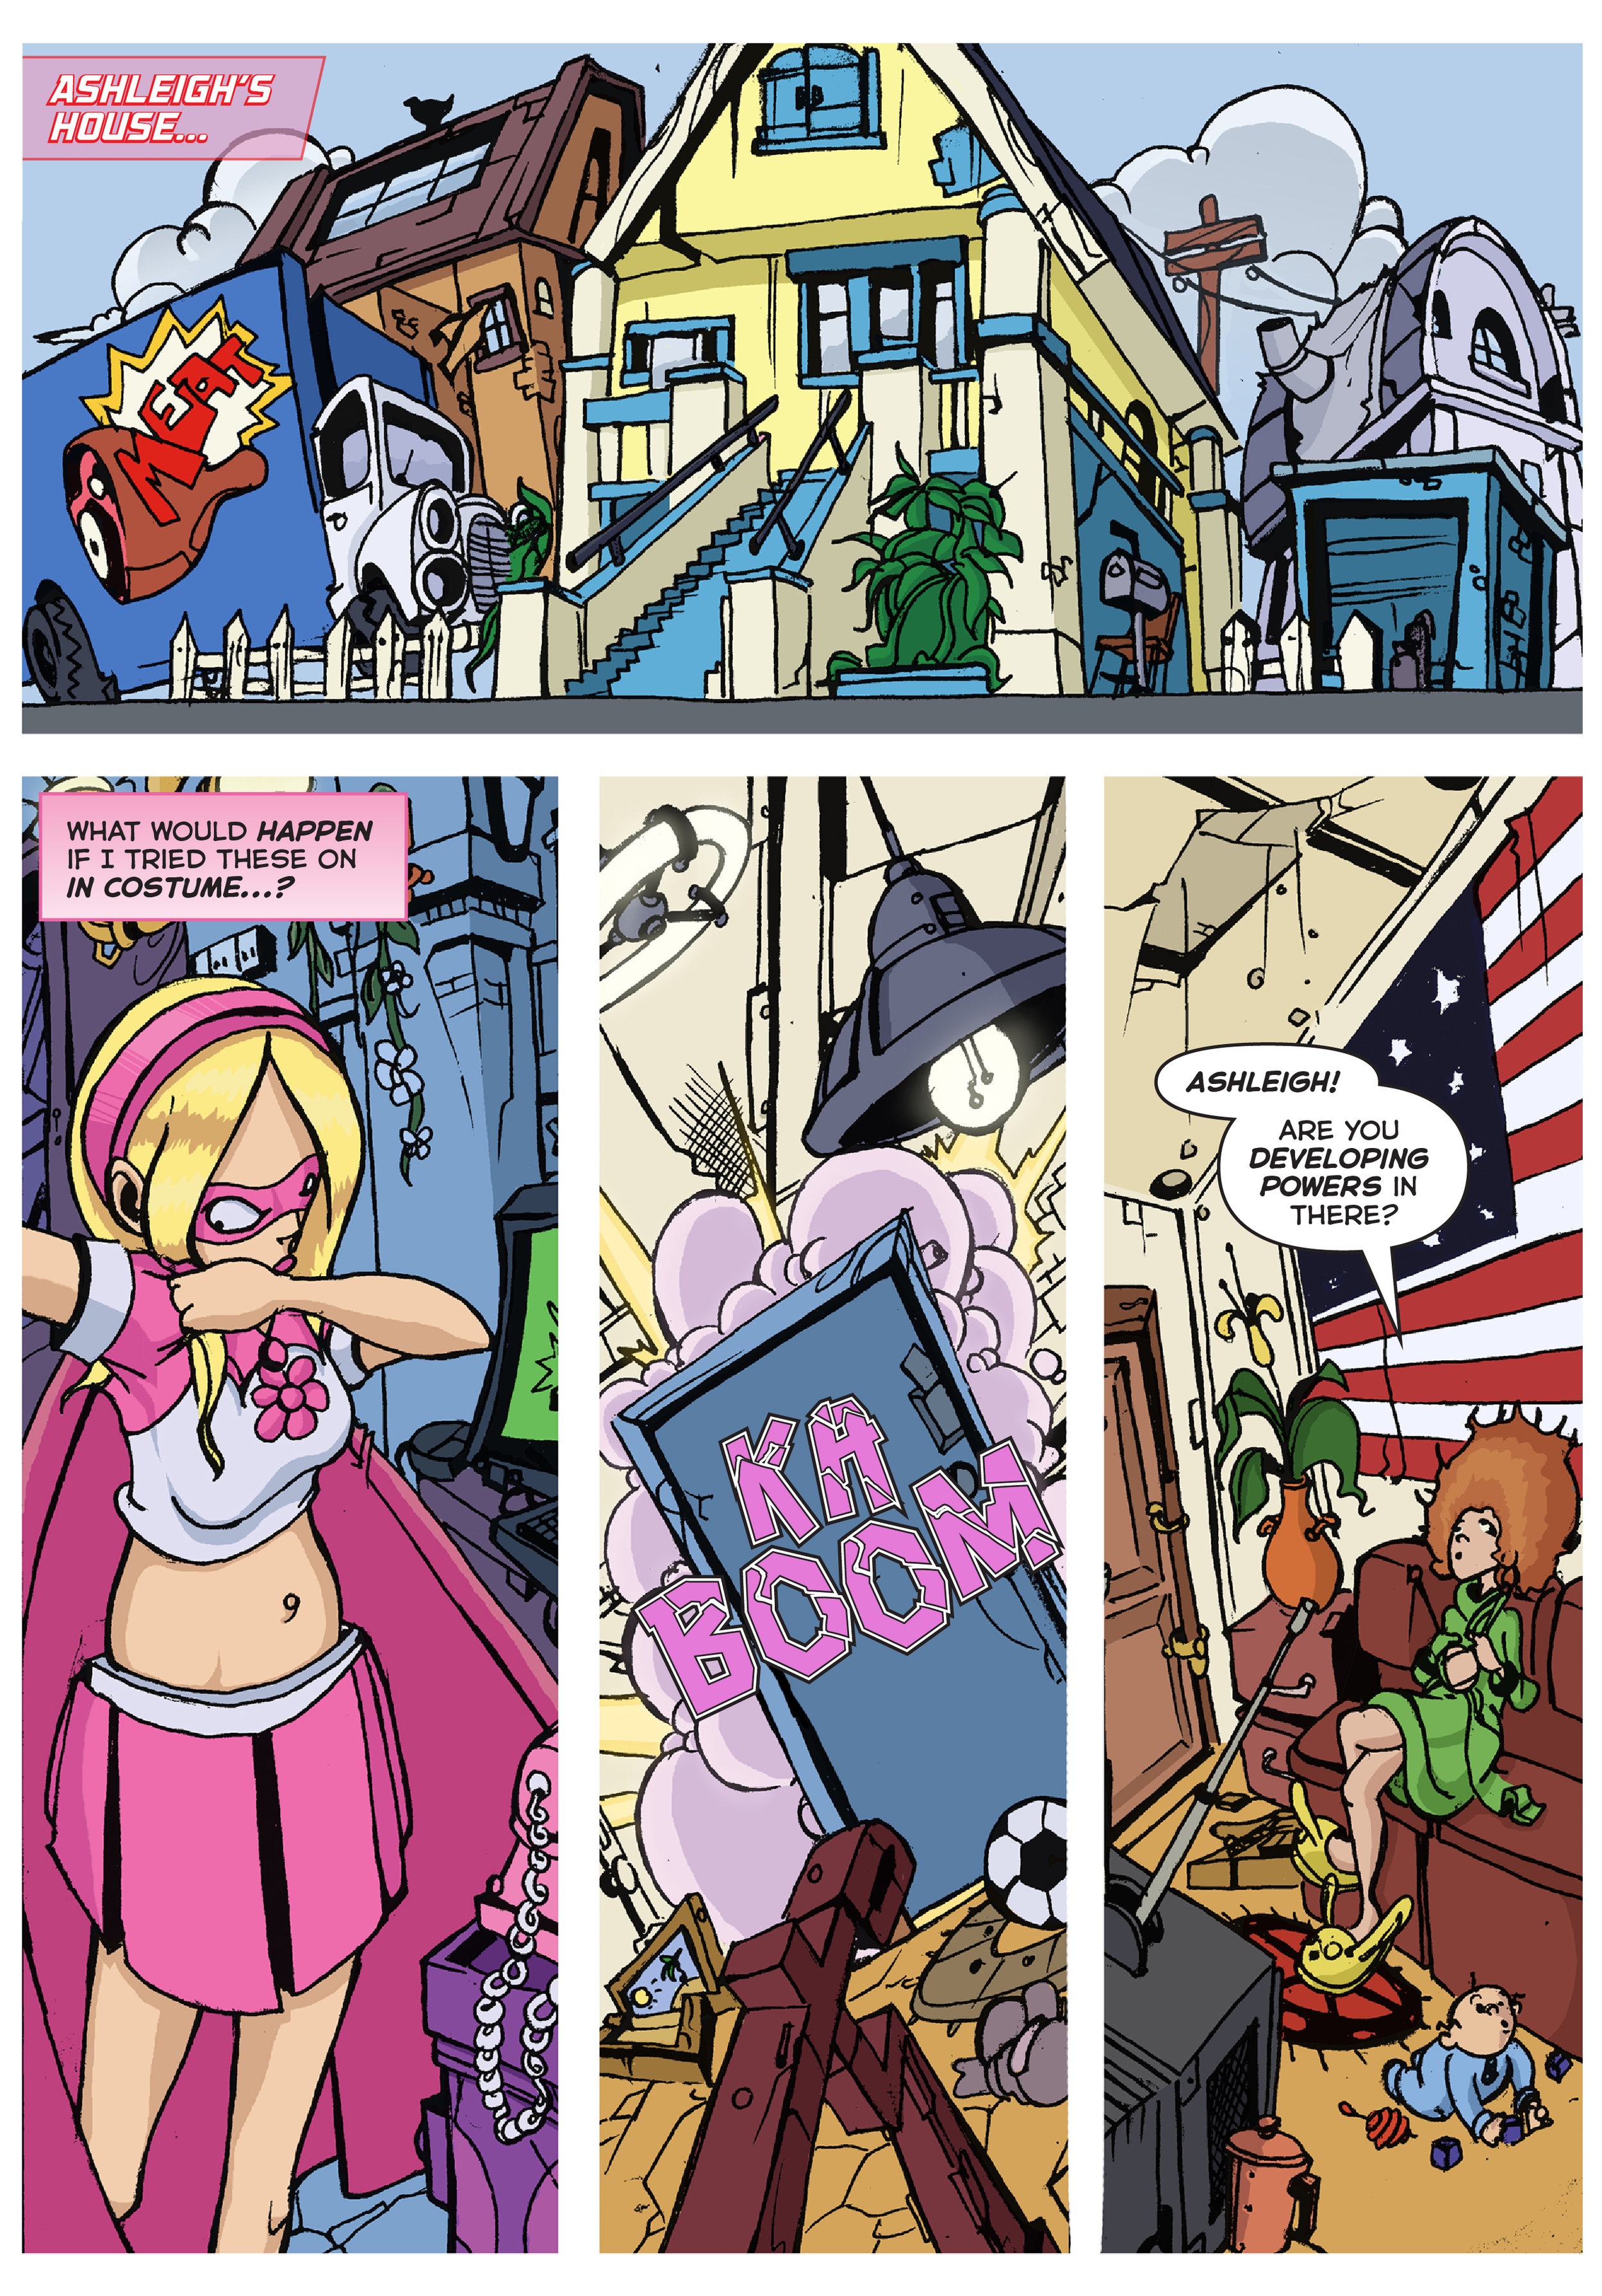 Pink Power 1 page 11.jpg